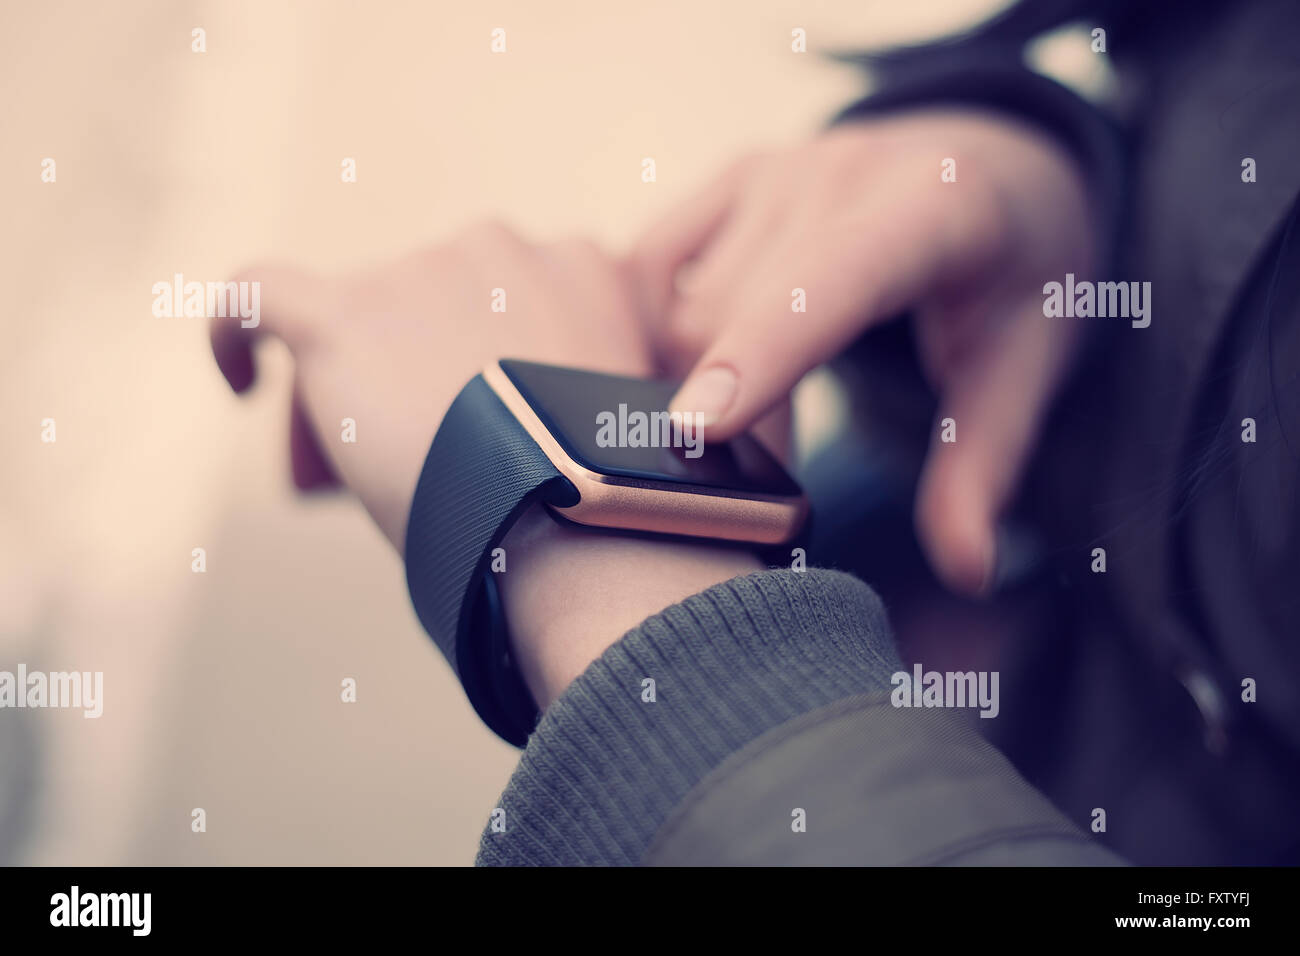 Female hands touchgin her trendy smart wrist watch. This new gadget lets you always stay connected to internet and social media networks from anywhere you want. Stock Photo